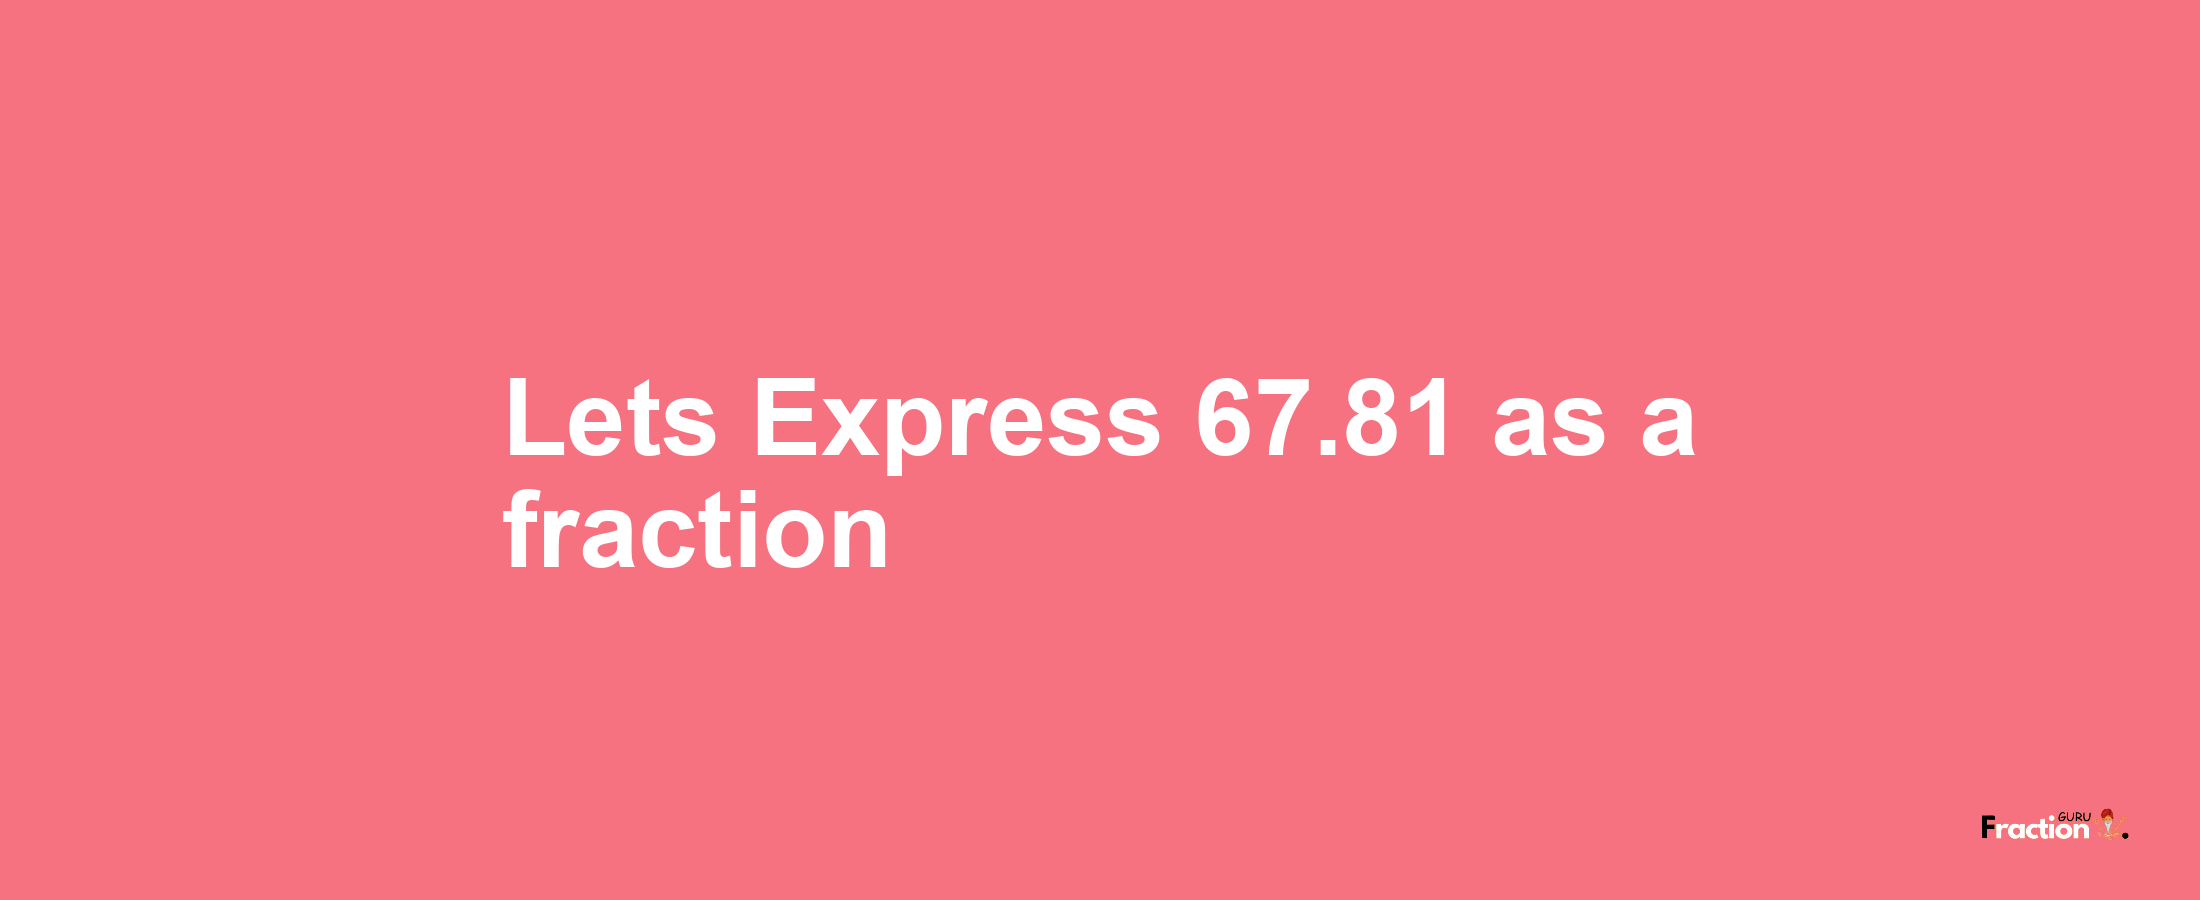 Lets Express 67.81 as afraction